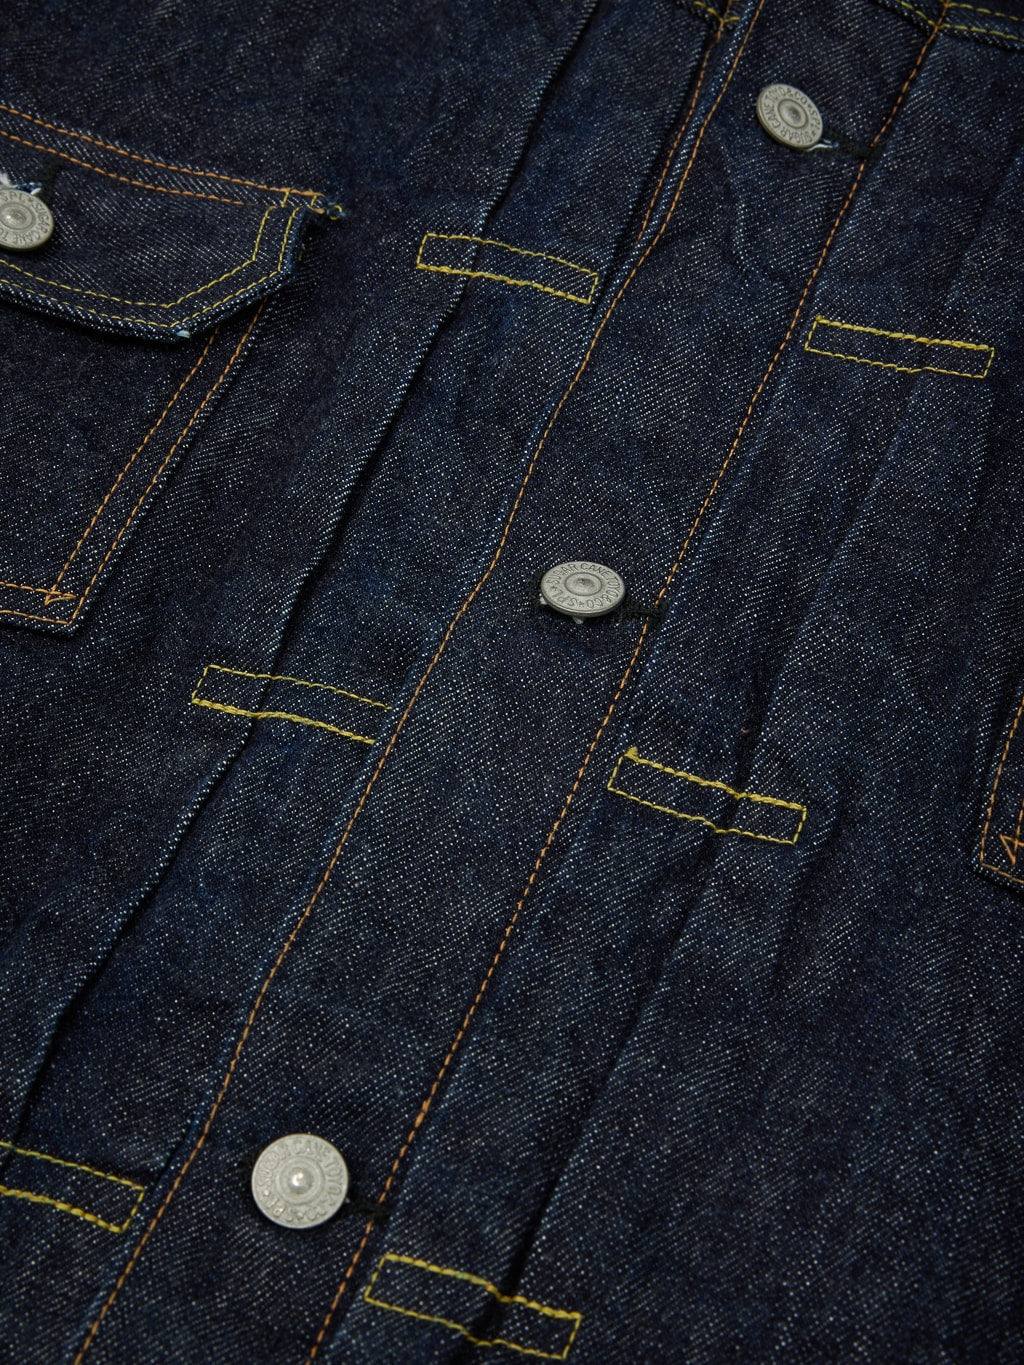 Sugar Cane 1953 Type II Denim blanket lined Jacket iron buttons